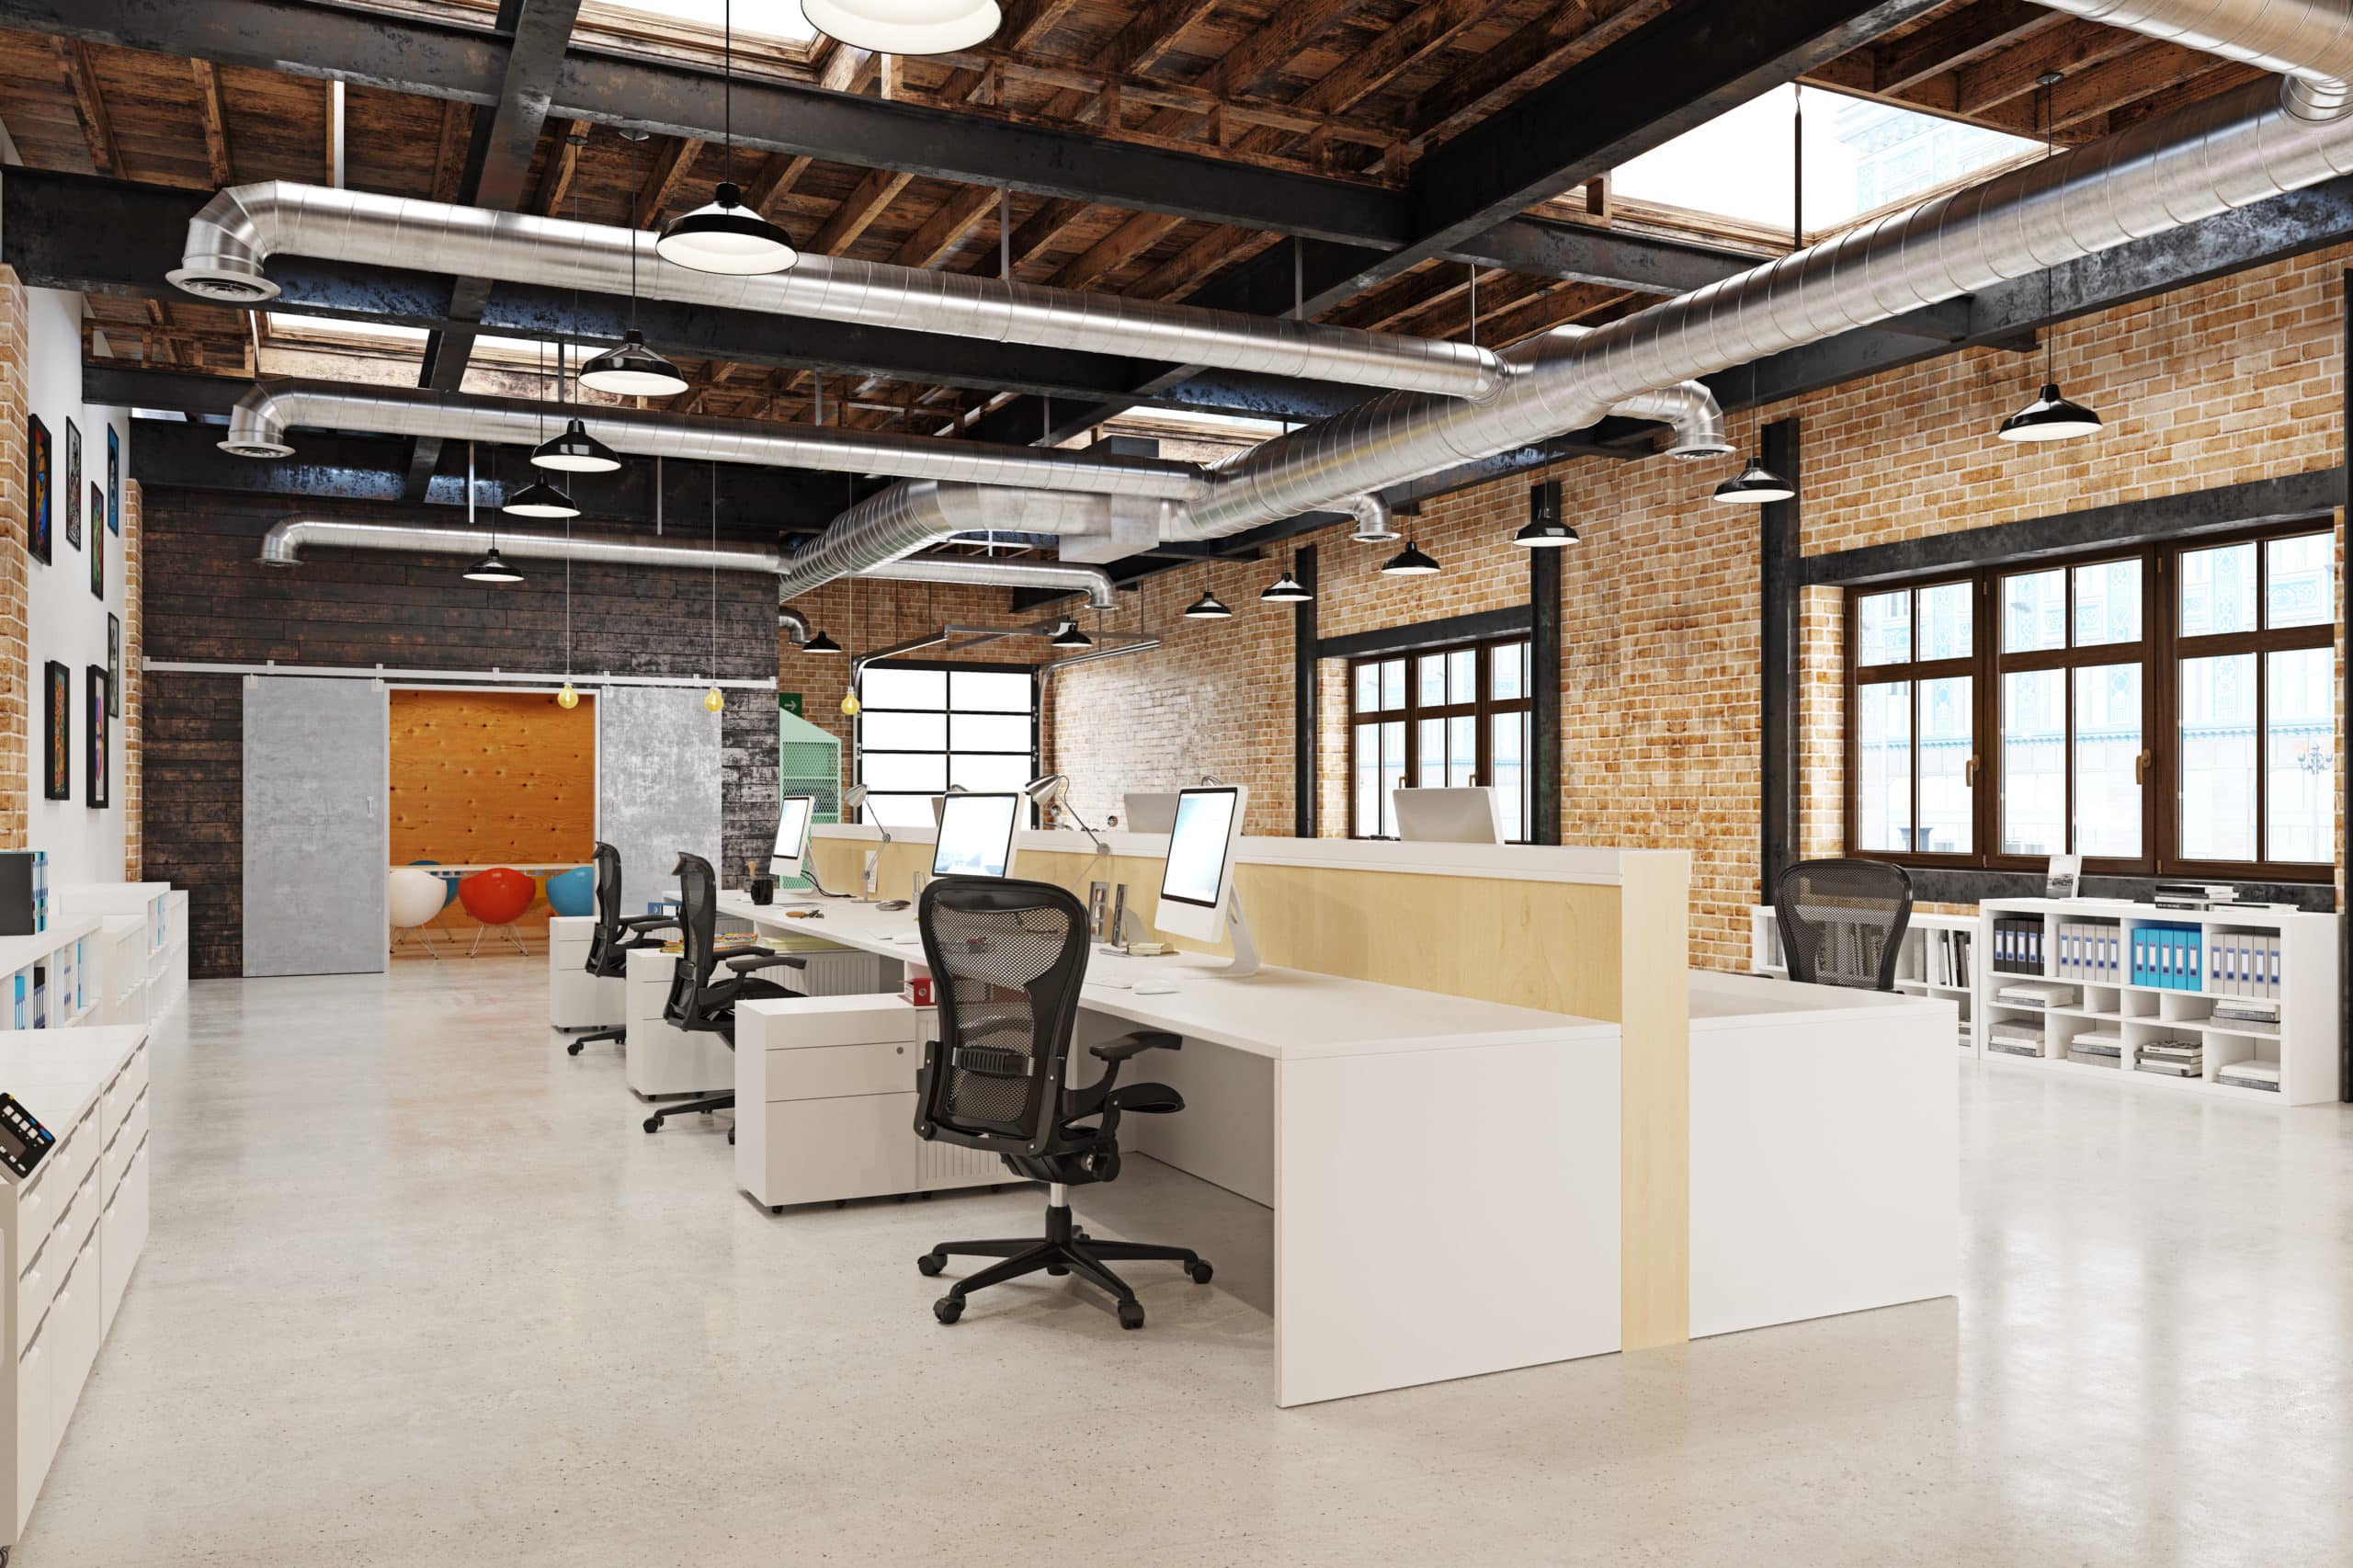 Office Design Trends for 2021 Workplace | Parmetech
